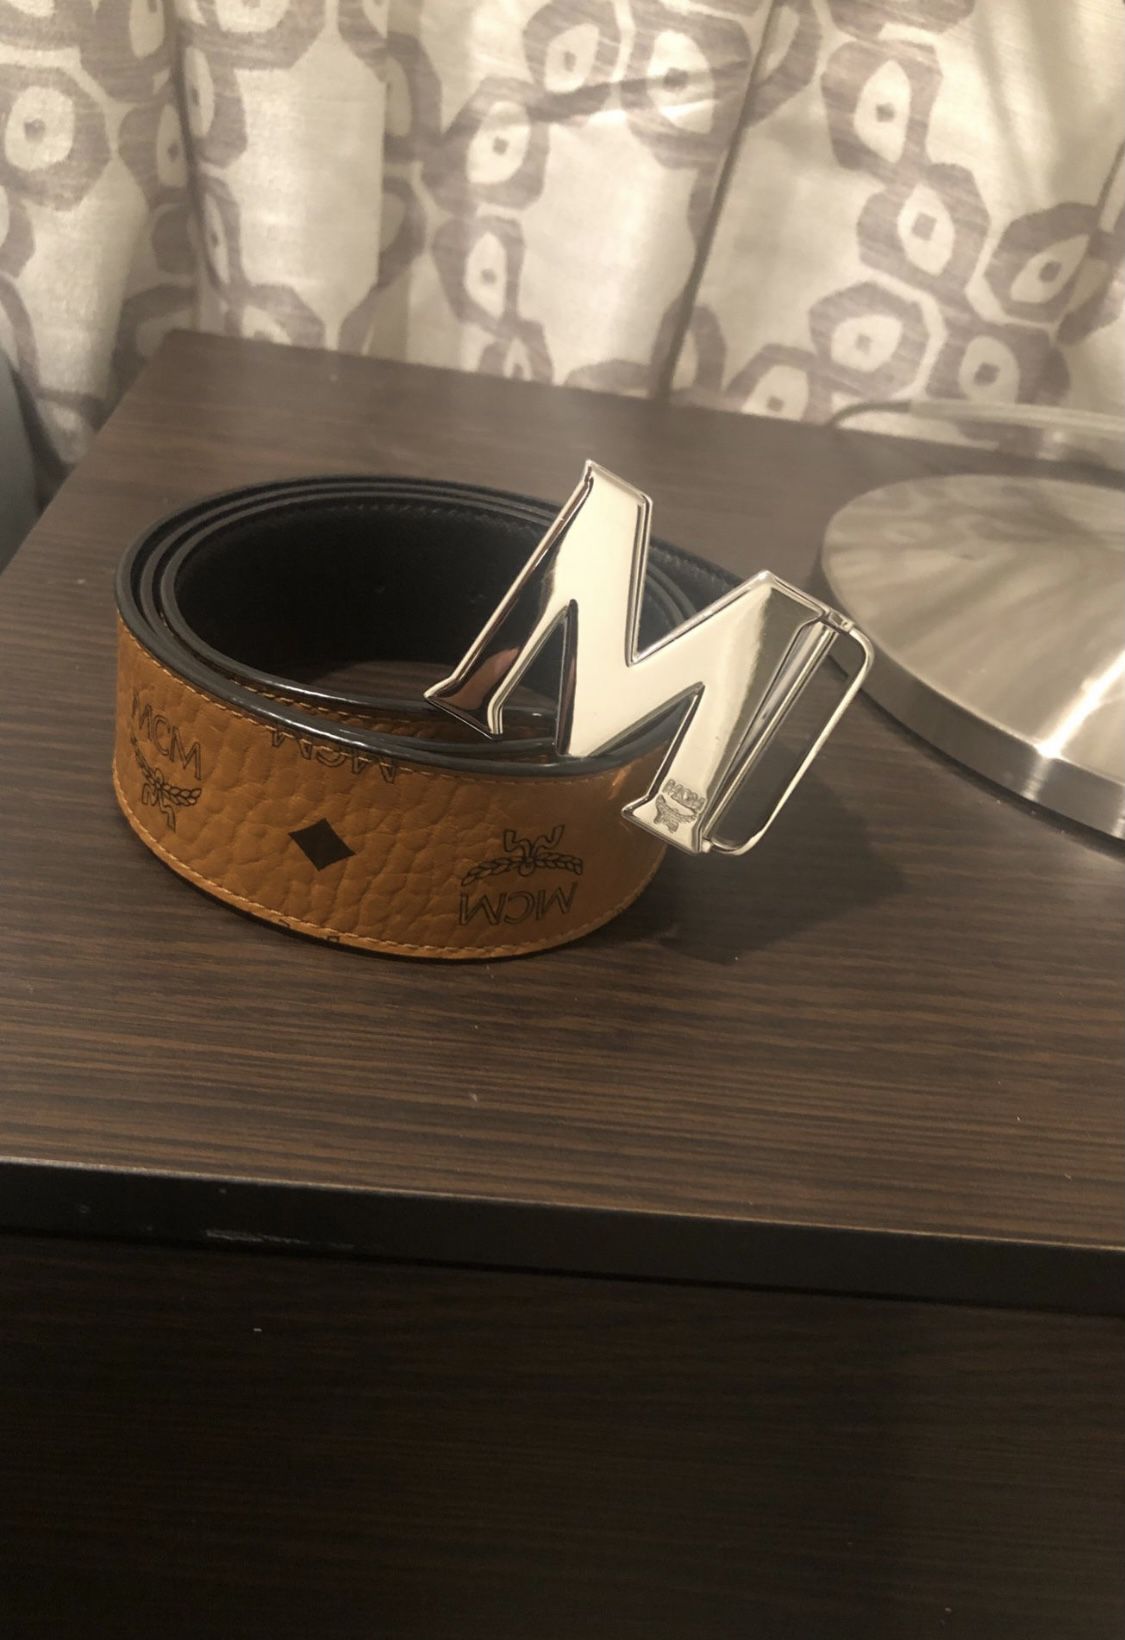 Authentic MCM Blue/Blk Reversible Belt for Sale in Queens, NY - OfferUp